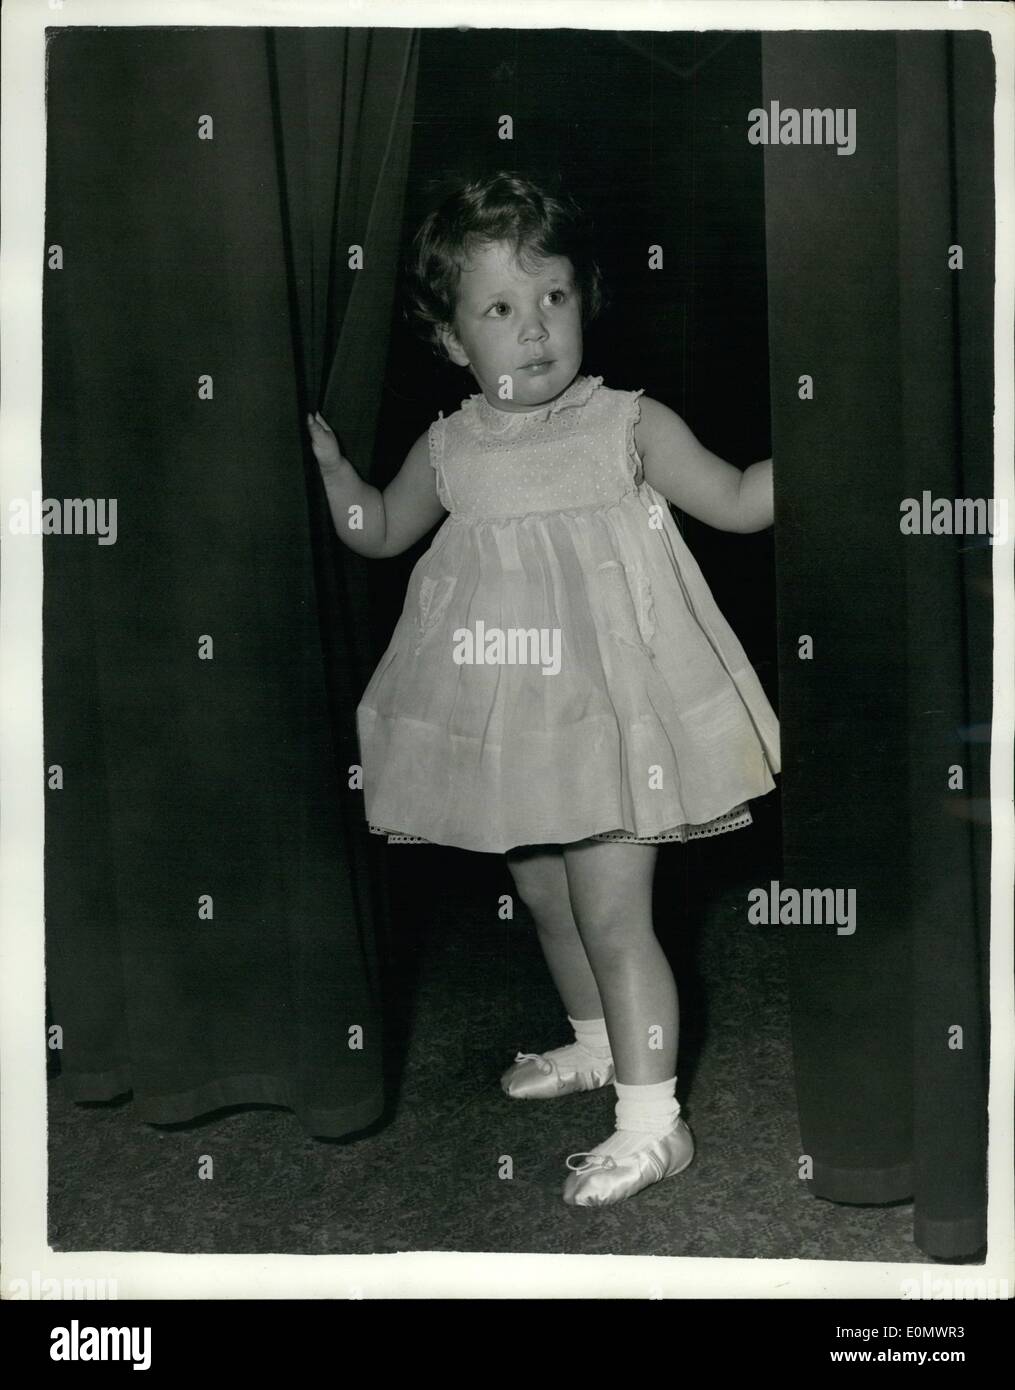 Jul. 07, 1956 - PETER USTINOV'S DAUGHTER MAKES HER DEPUT AT DANCING MATINEE REHEARSALS, 2-year-old PAULA daughter of PETER USTINOV the famous actor and film Star, is among some of the hundred little children who will be giving a dancing matinee at the Adelphie Theatre, on Tuesday July 10th, in aid of the League of Pity, the junior section of the National Society for the Prevention of Cruelty to Children. This morning little PAULA vent along to the theatre for rehearsals Stock Photo